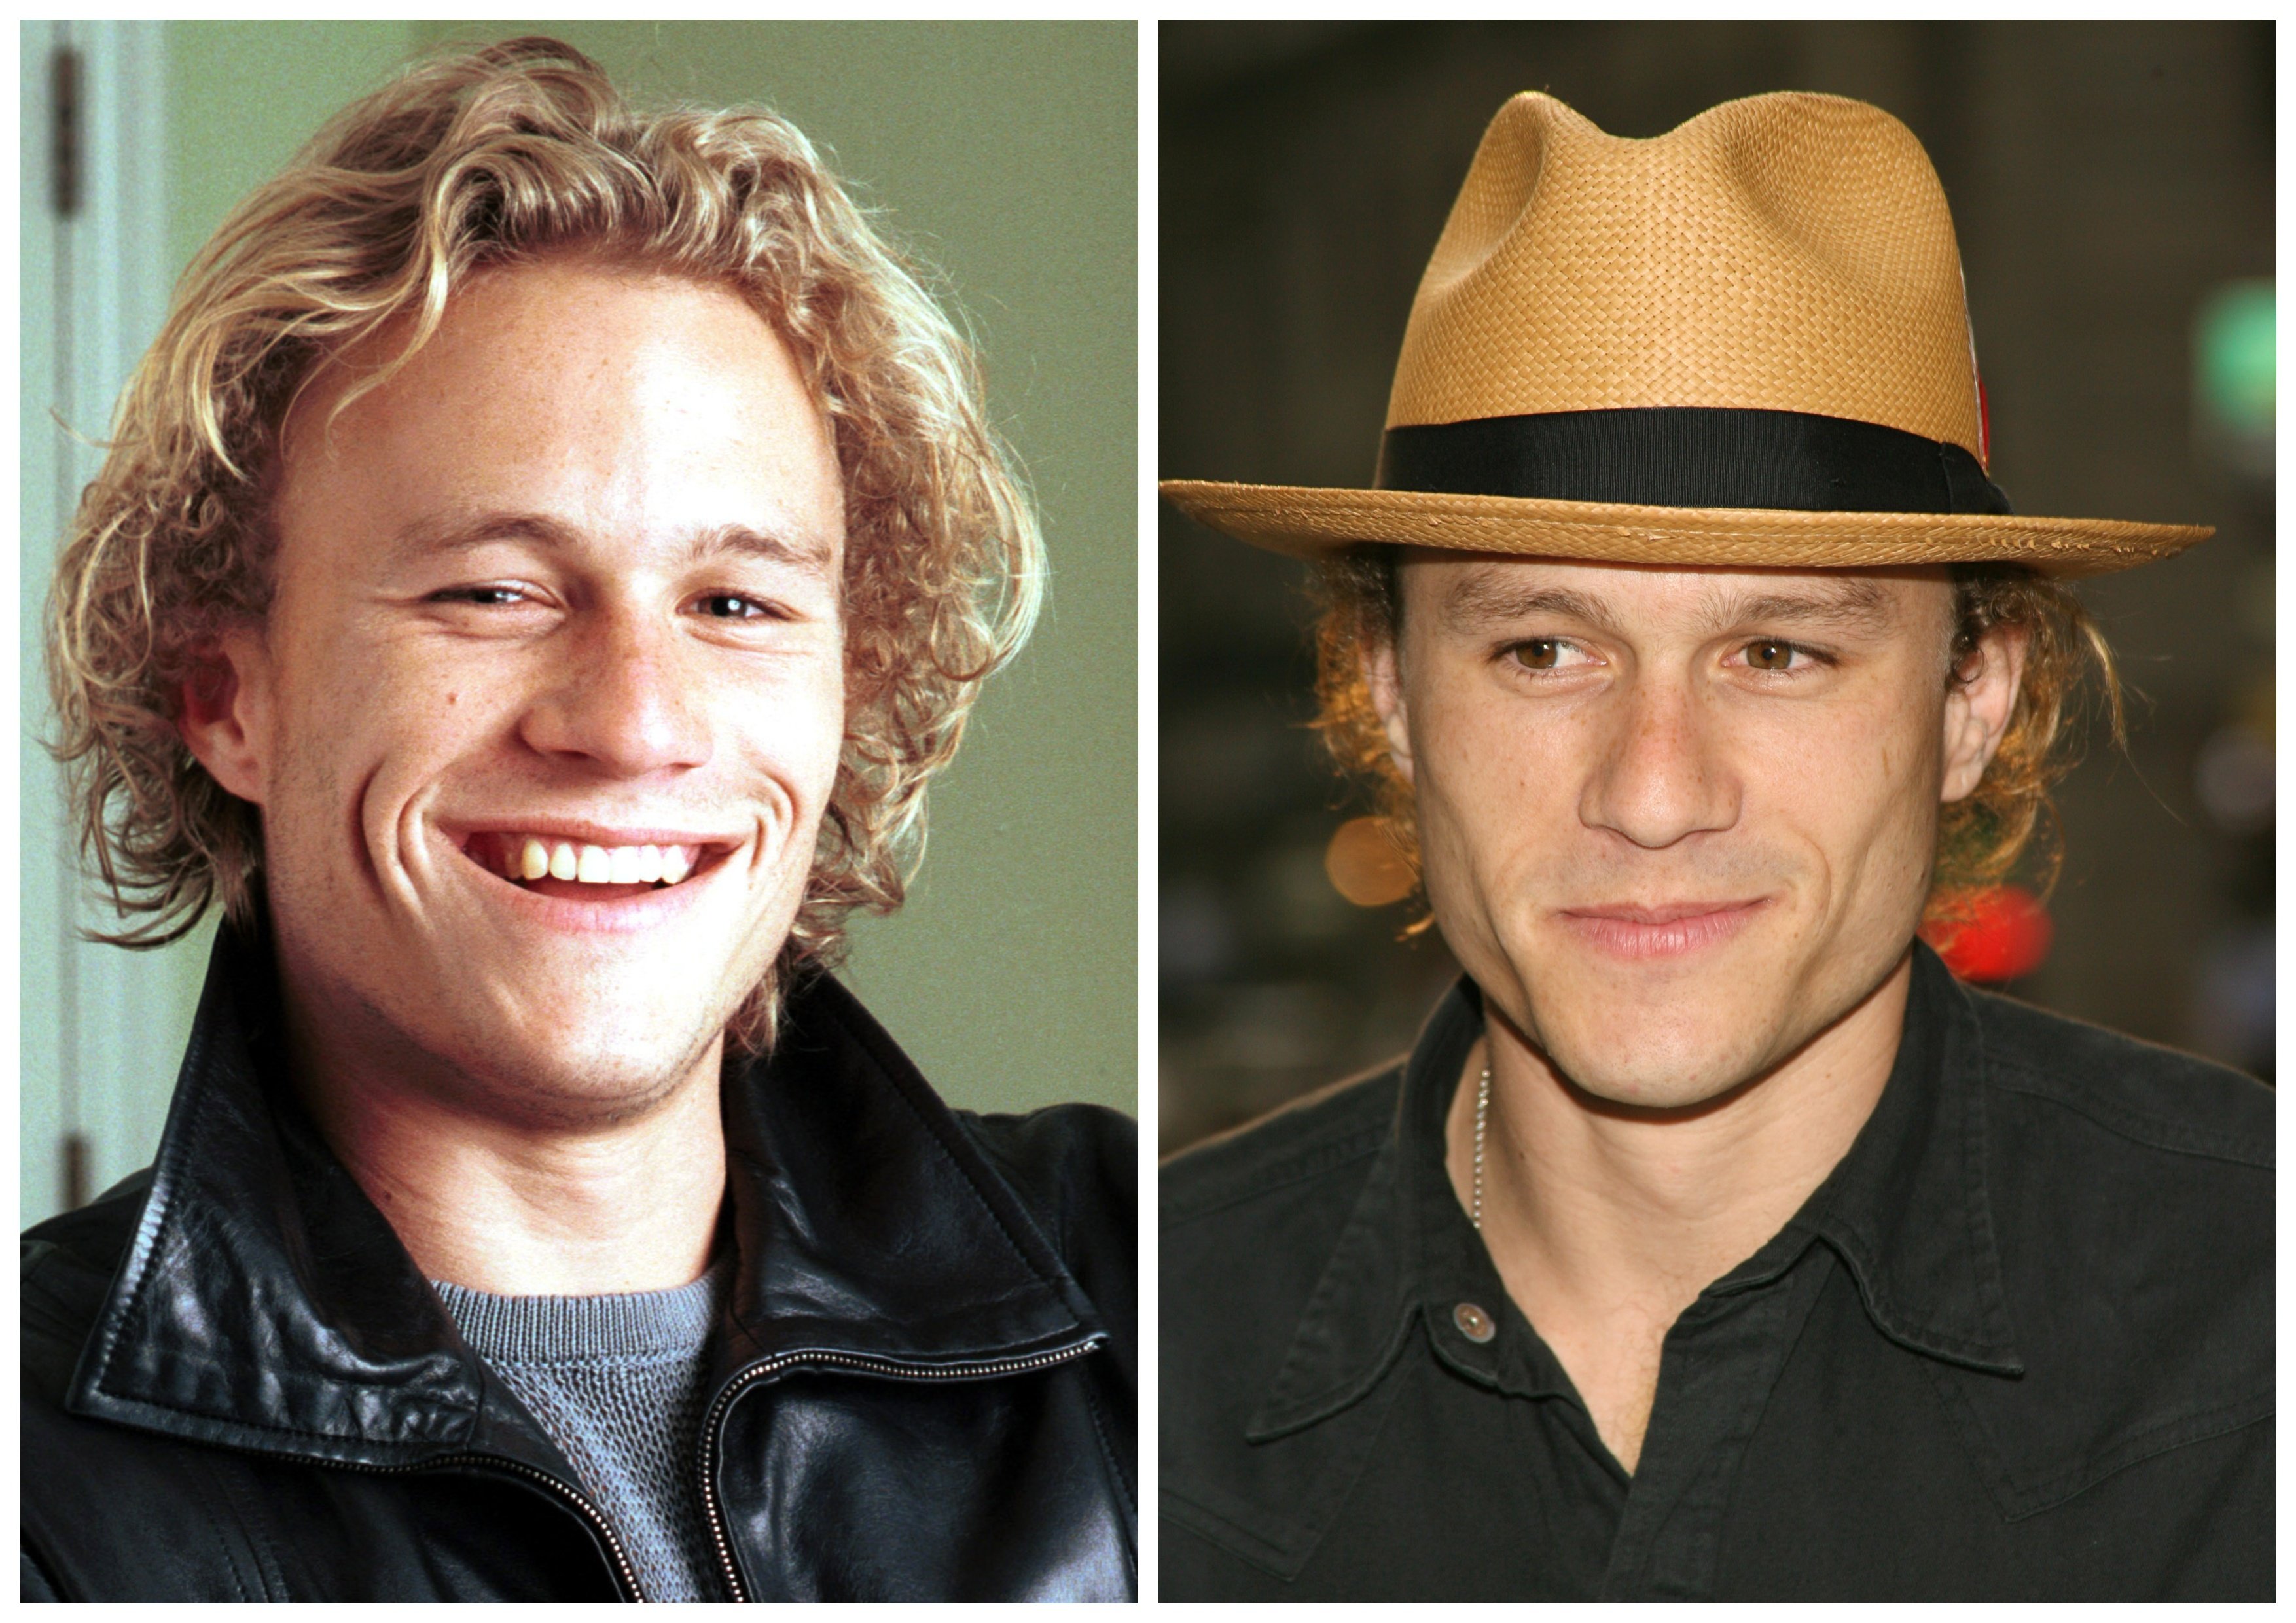 '10 Things I Hate About You' cast member Heath Ledger